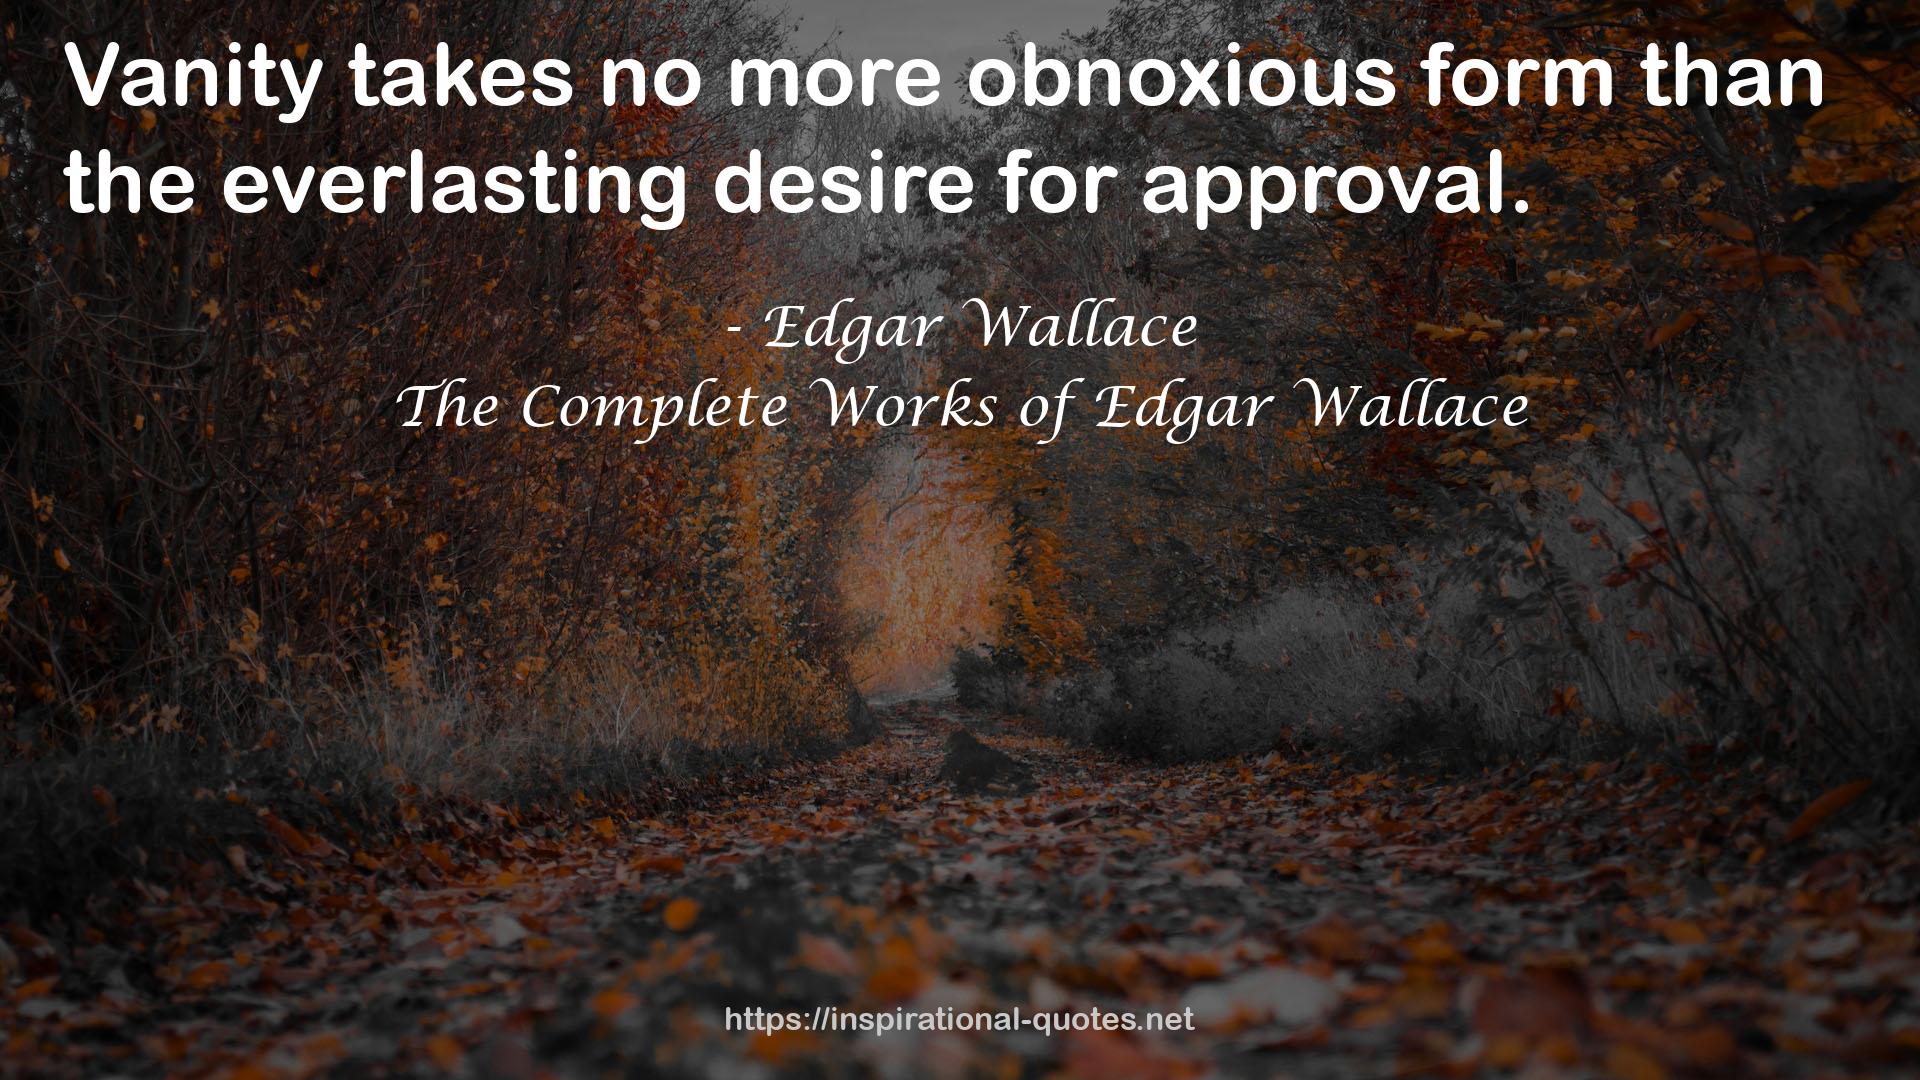 The Complete Works of Edgar Wallace QUOTES